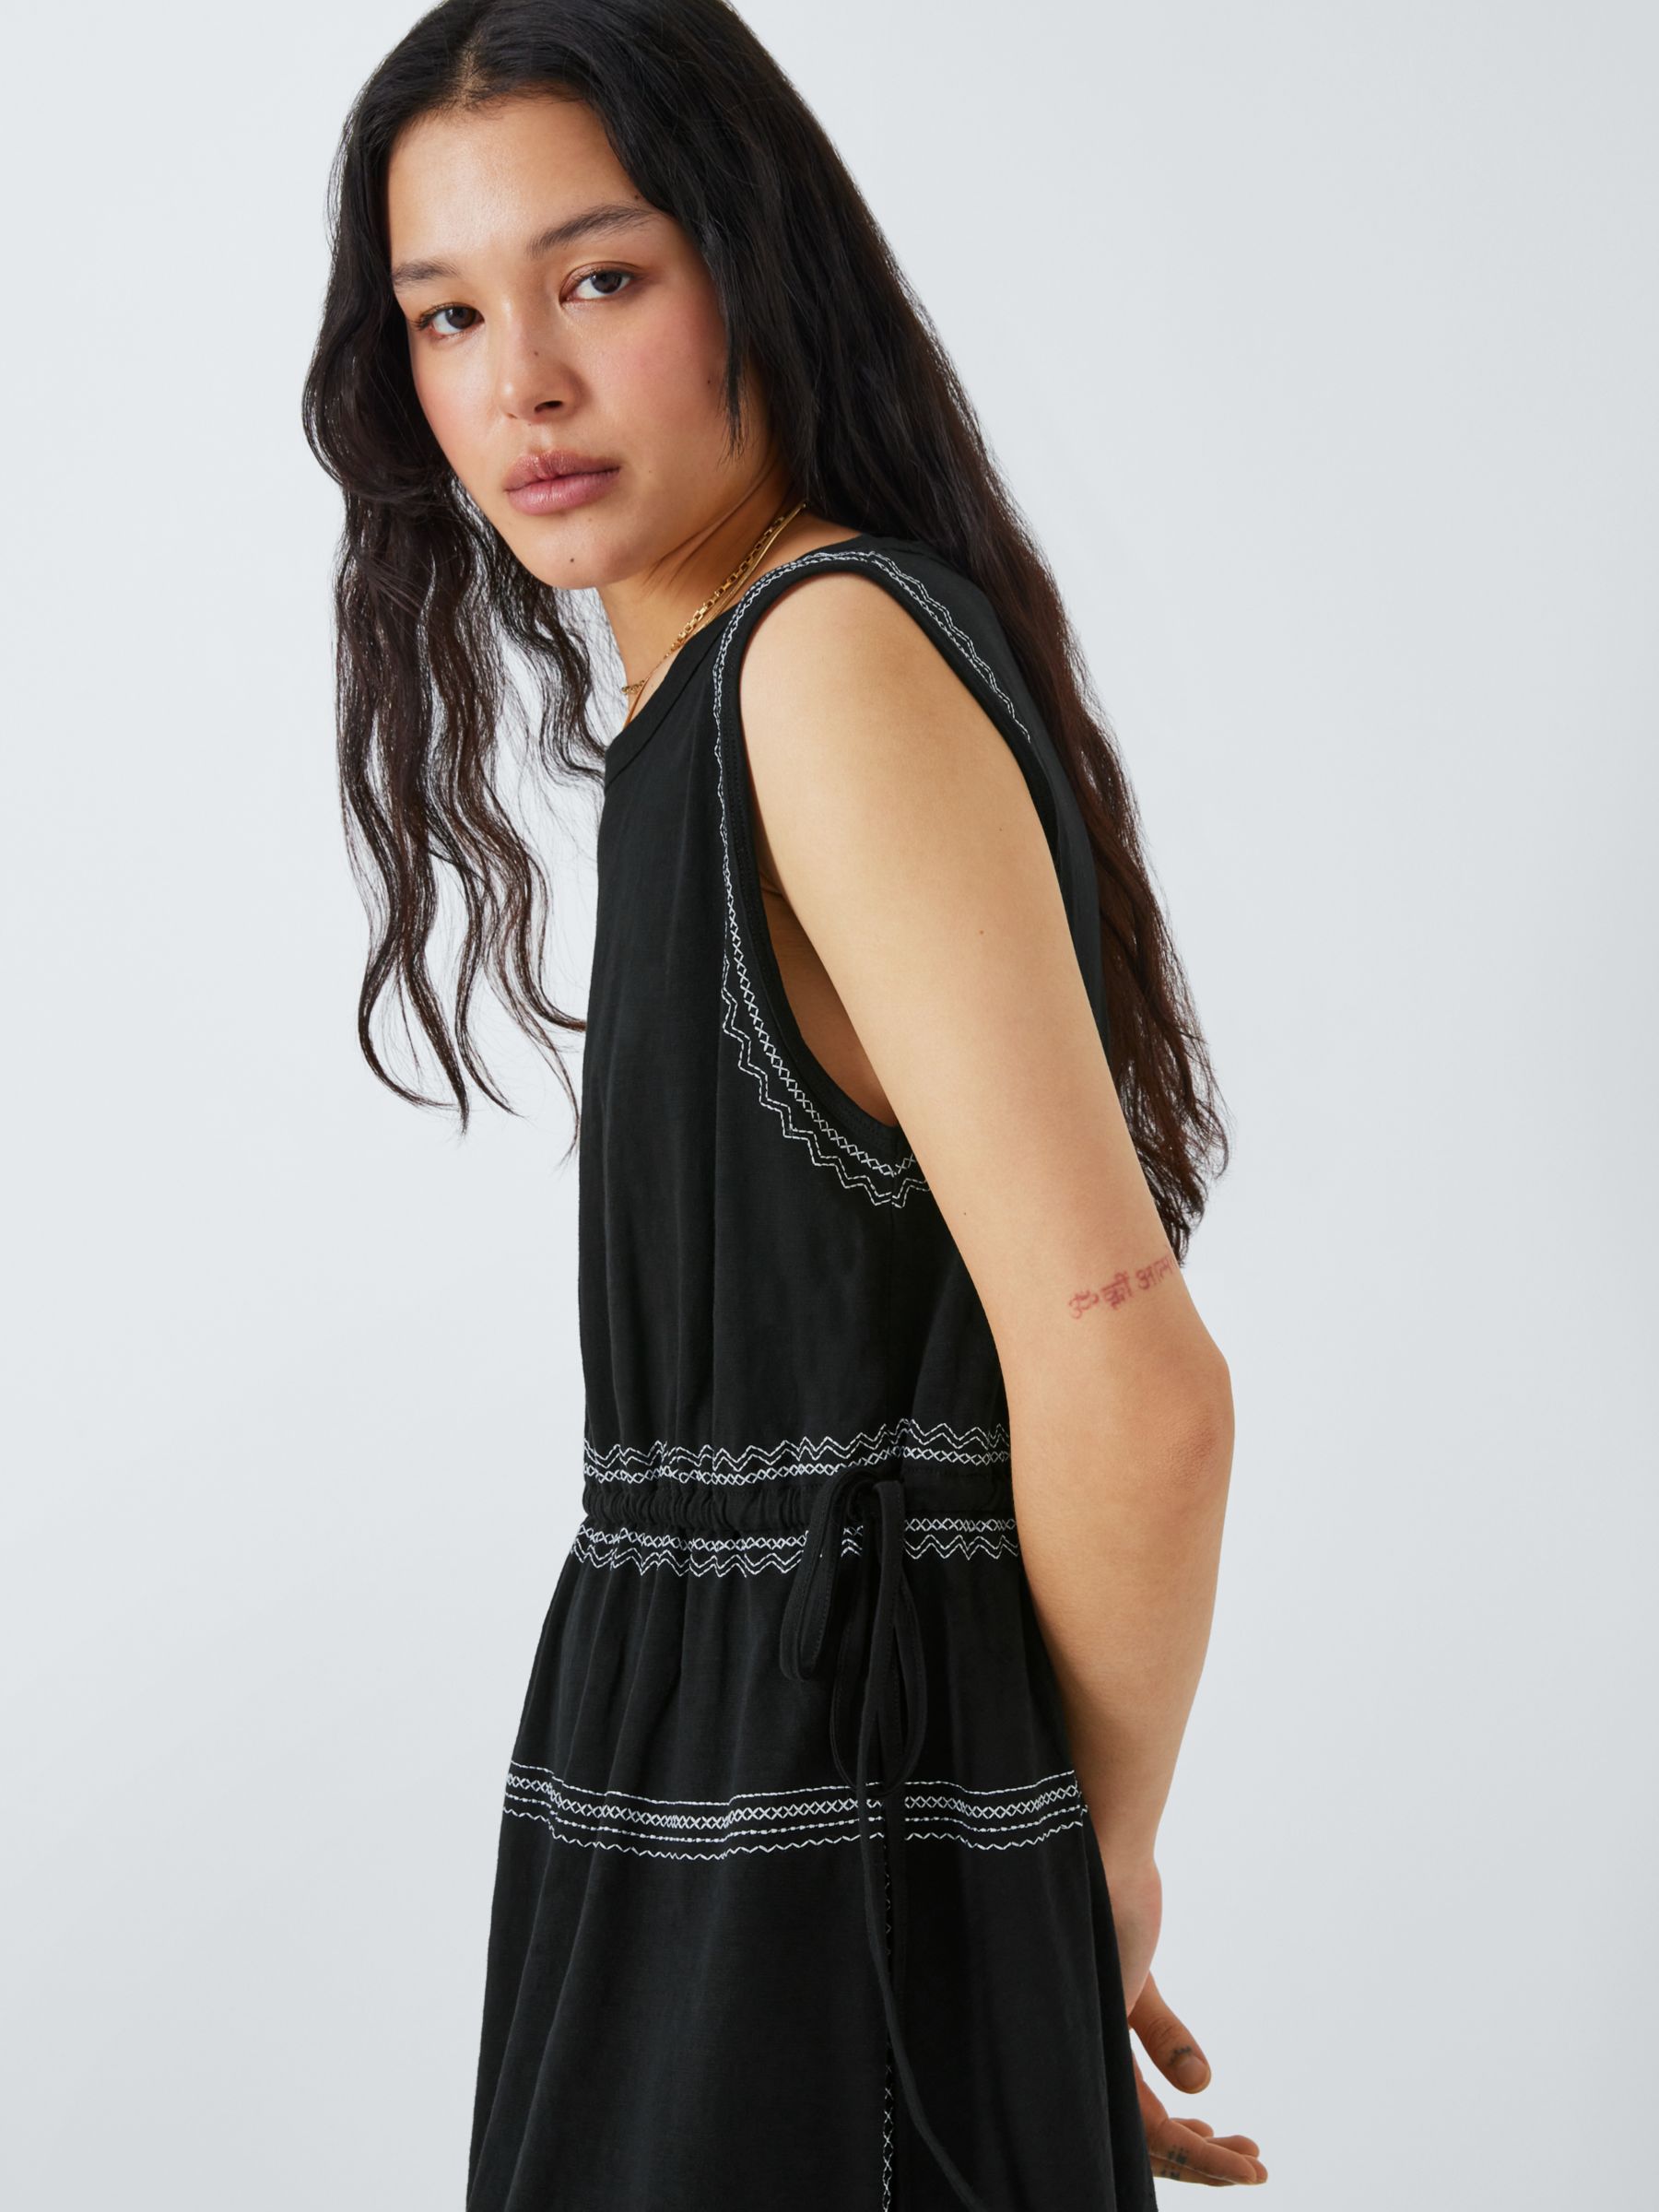 AND/OR Stella Embroidered Jersey Dress, Black, 6